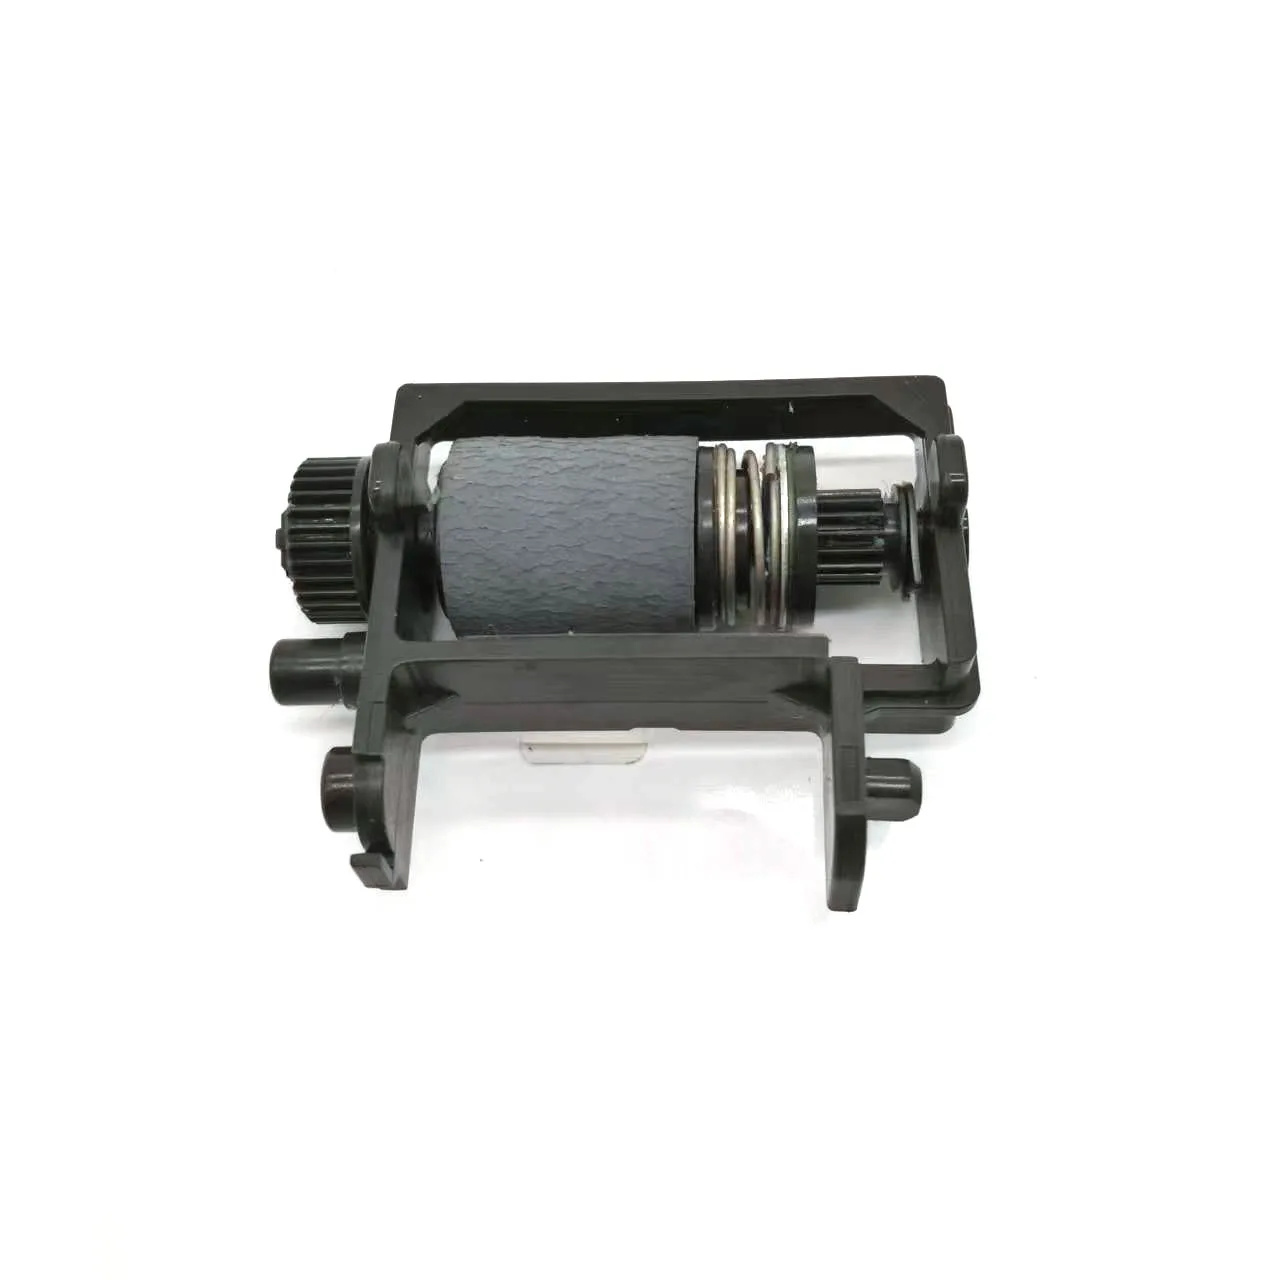 

Pickup Roller ME-620F Fits For Epson ME-535 ME600F ME520 ME520F ME510 ME535 ME-520F ME620F ME-510 ME-600F ME-520